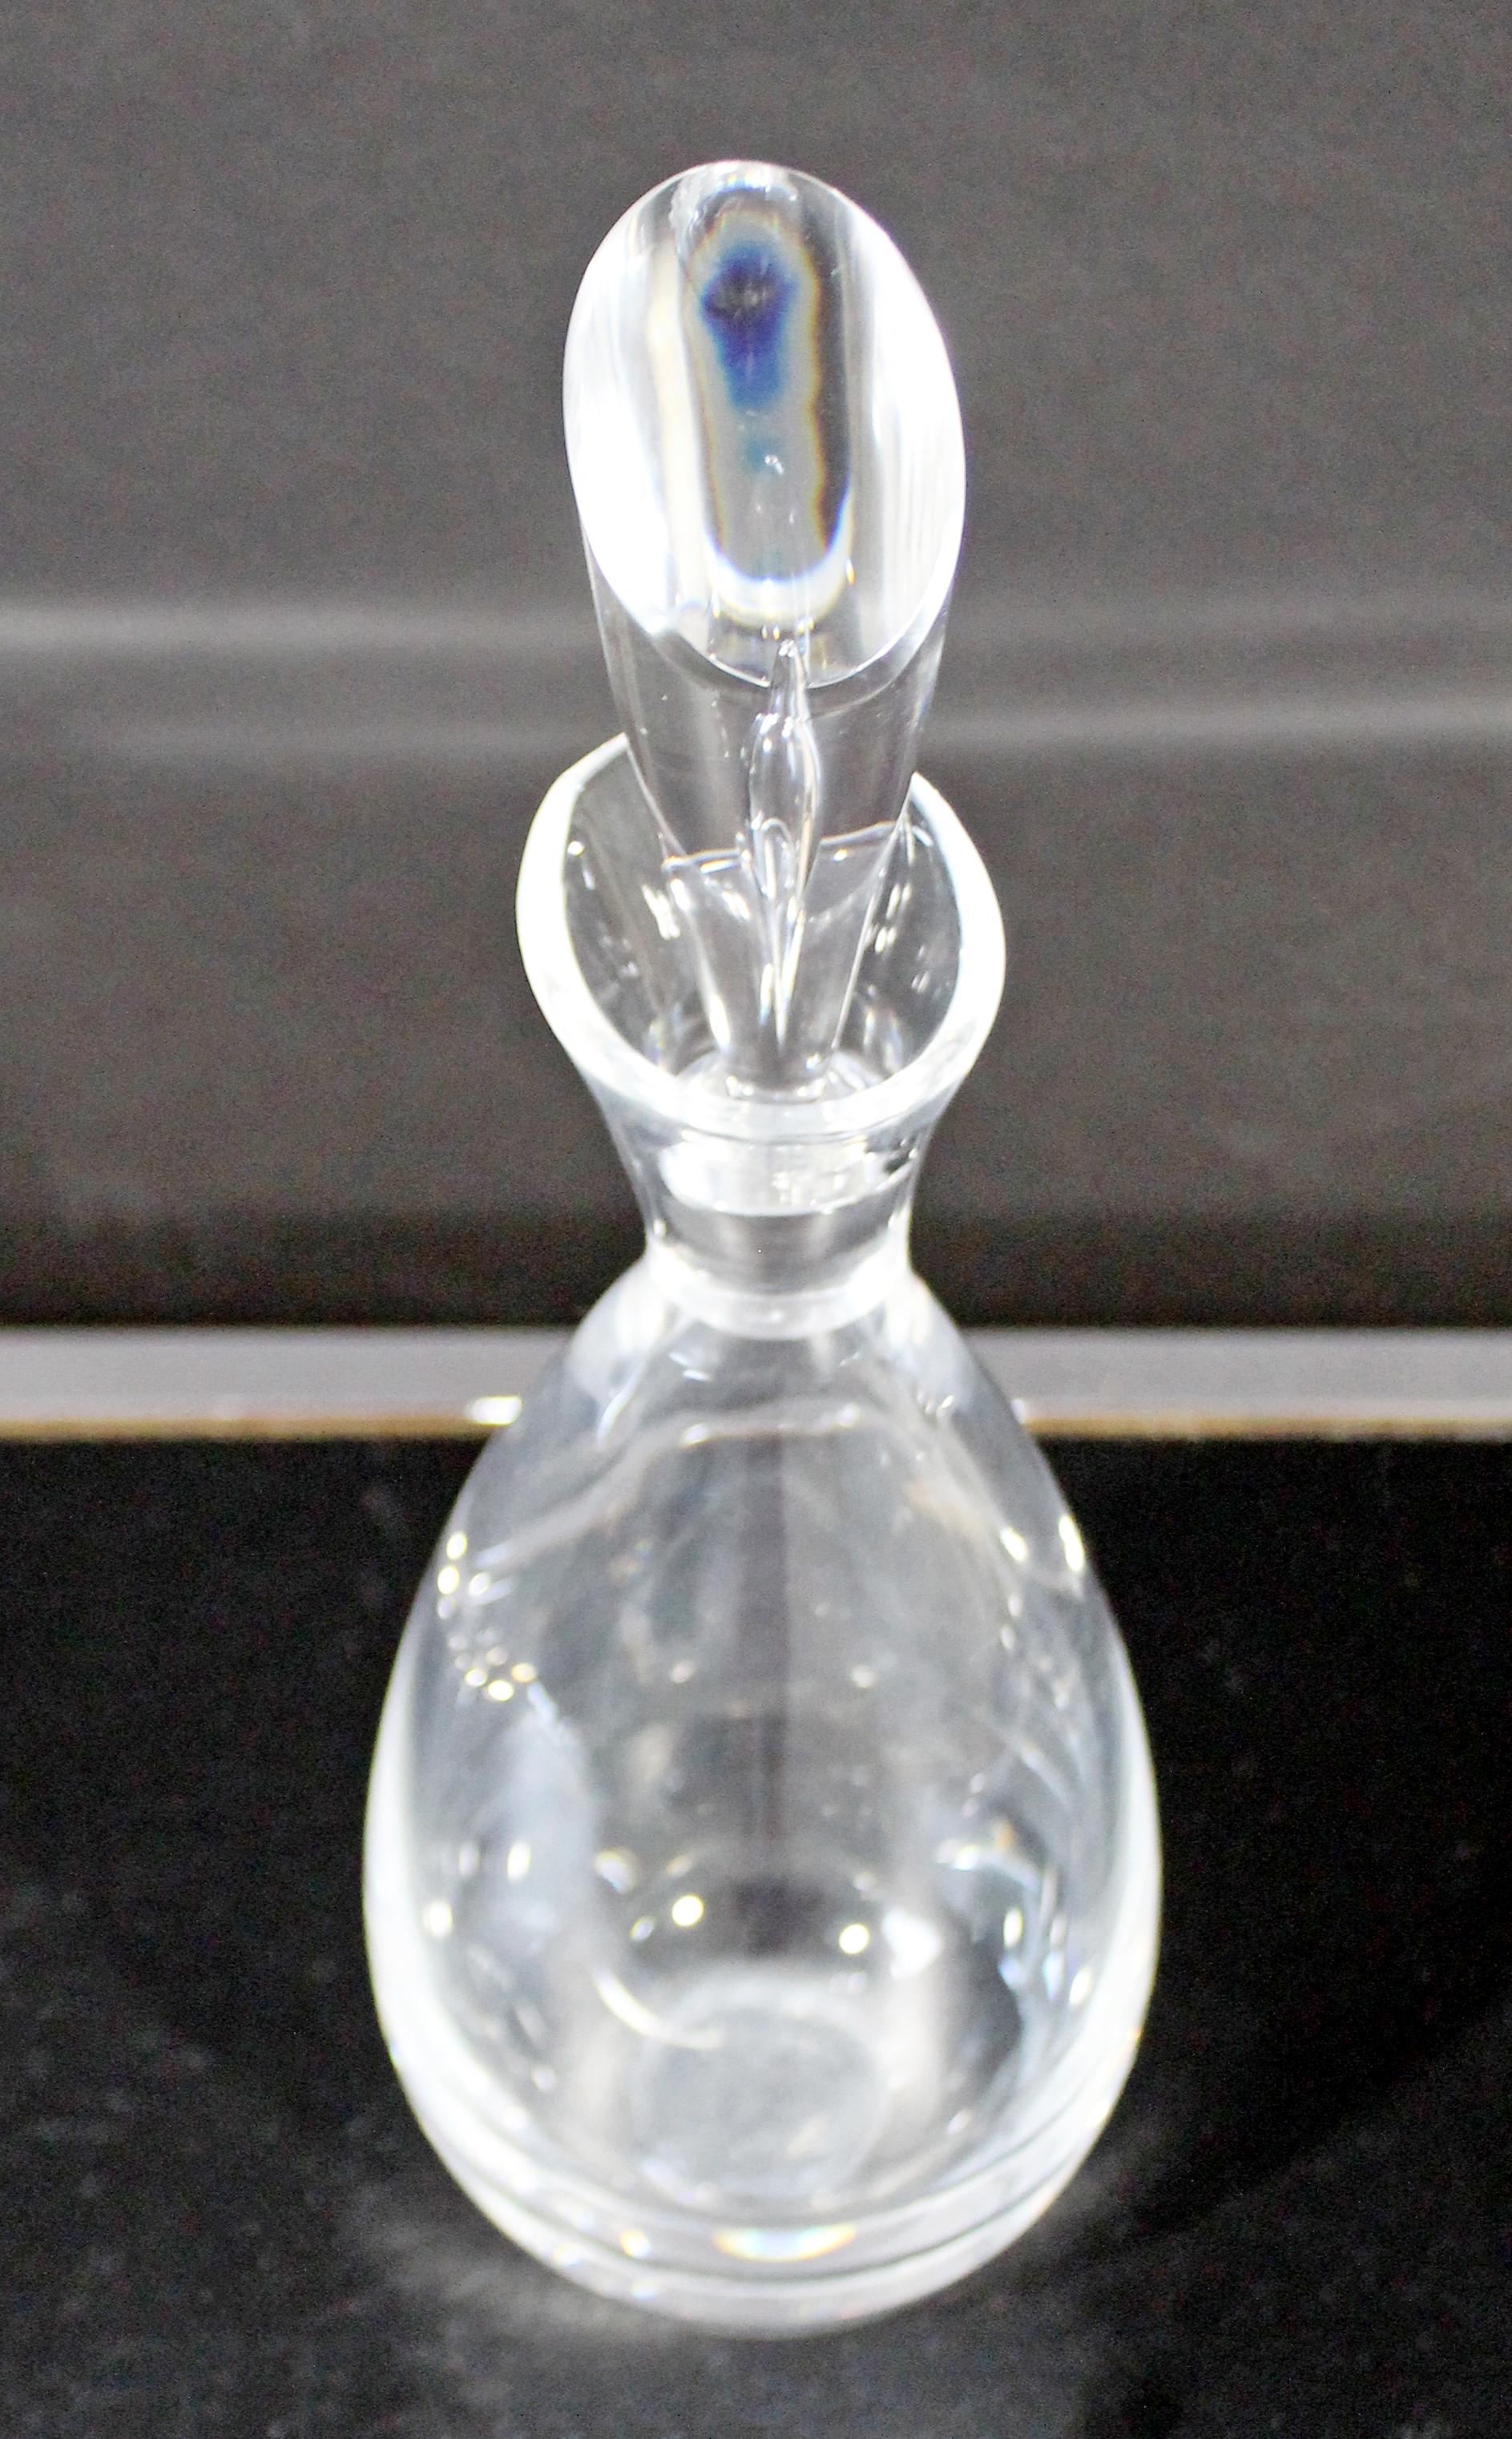 For your consideration is a romantic, glass wine decanter, with a teardrop stopper, signed Steuben. In vintage condition. The dimensions are 4